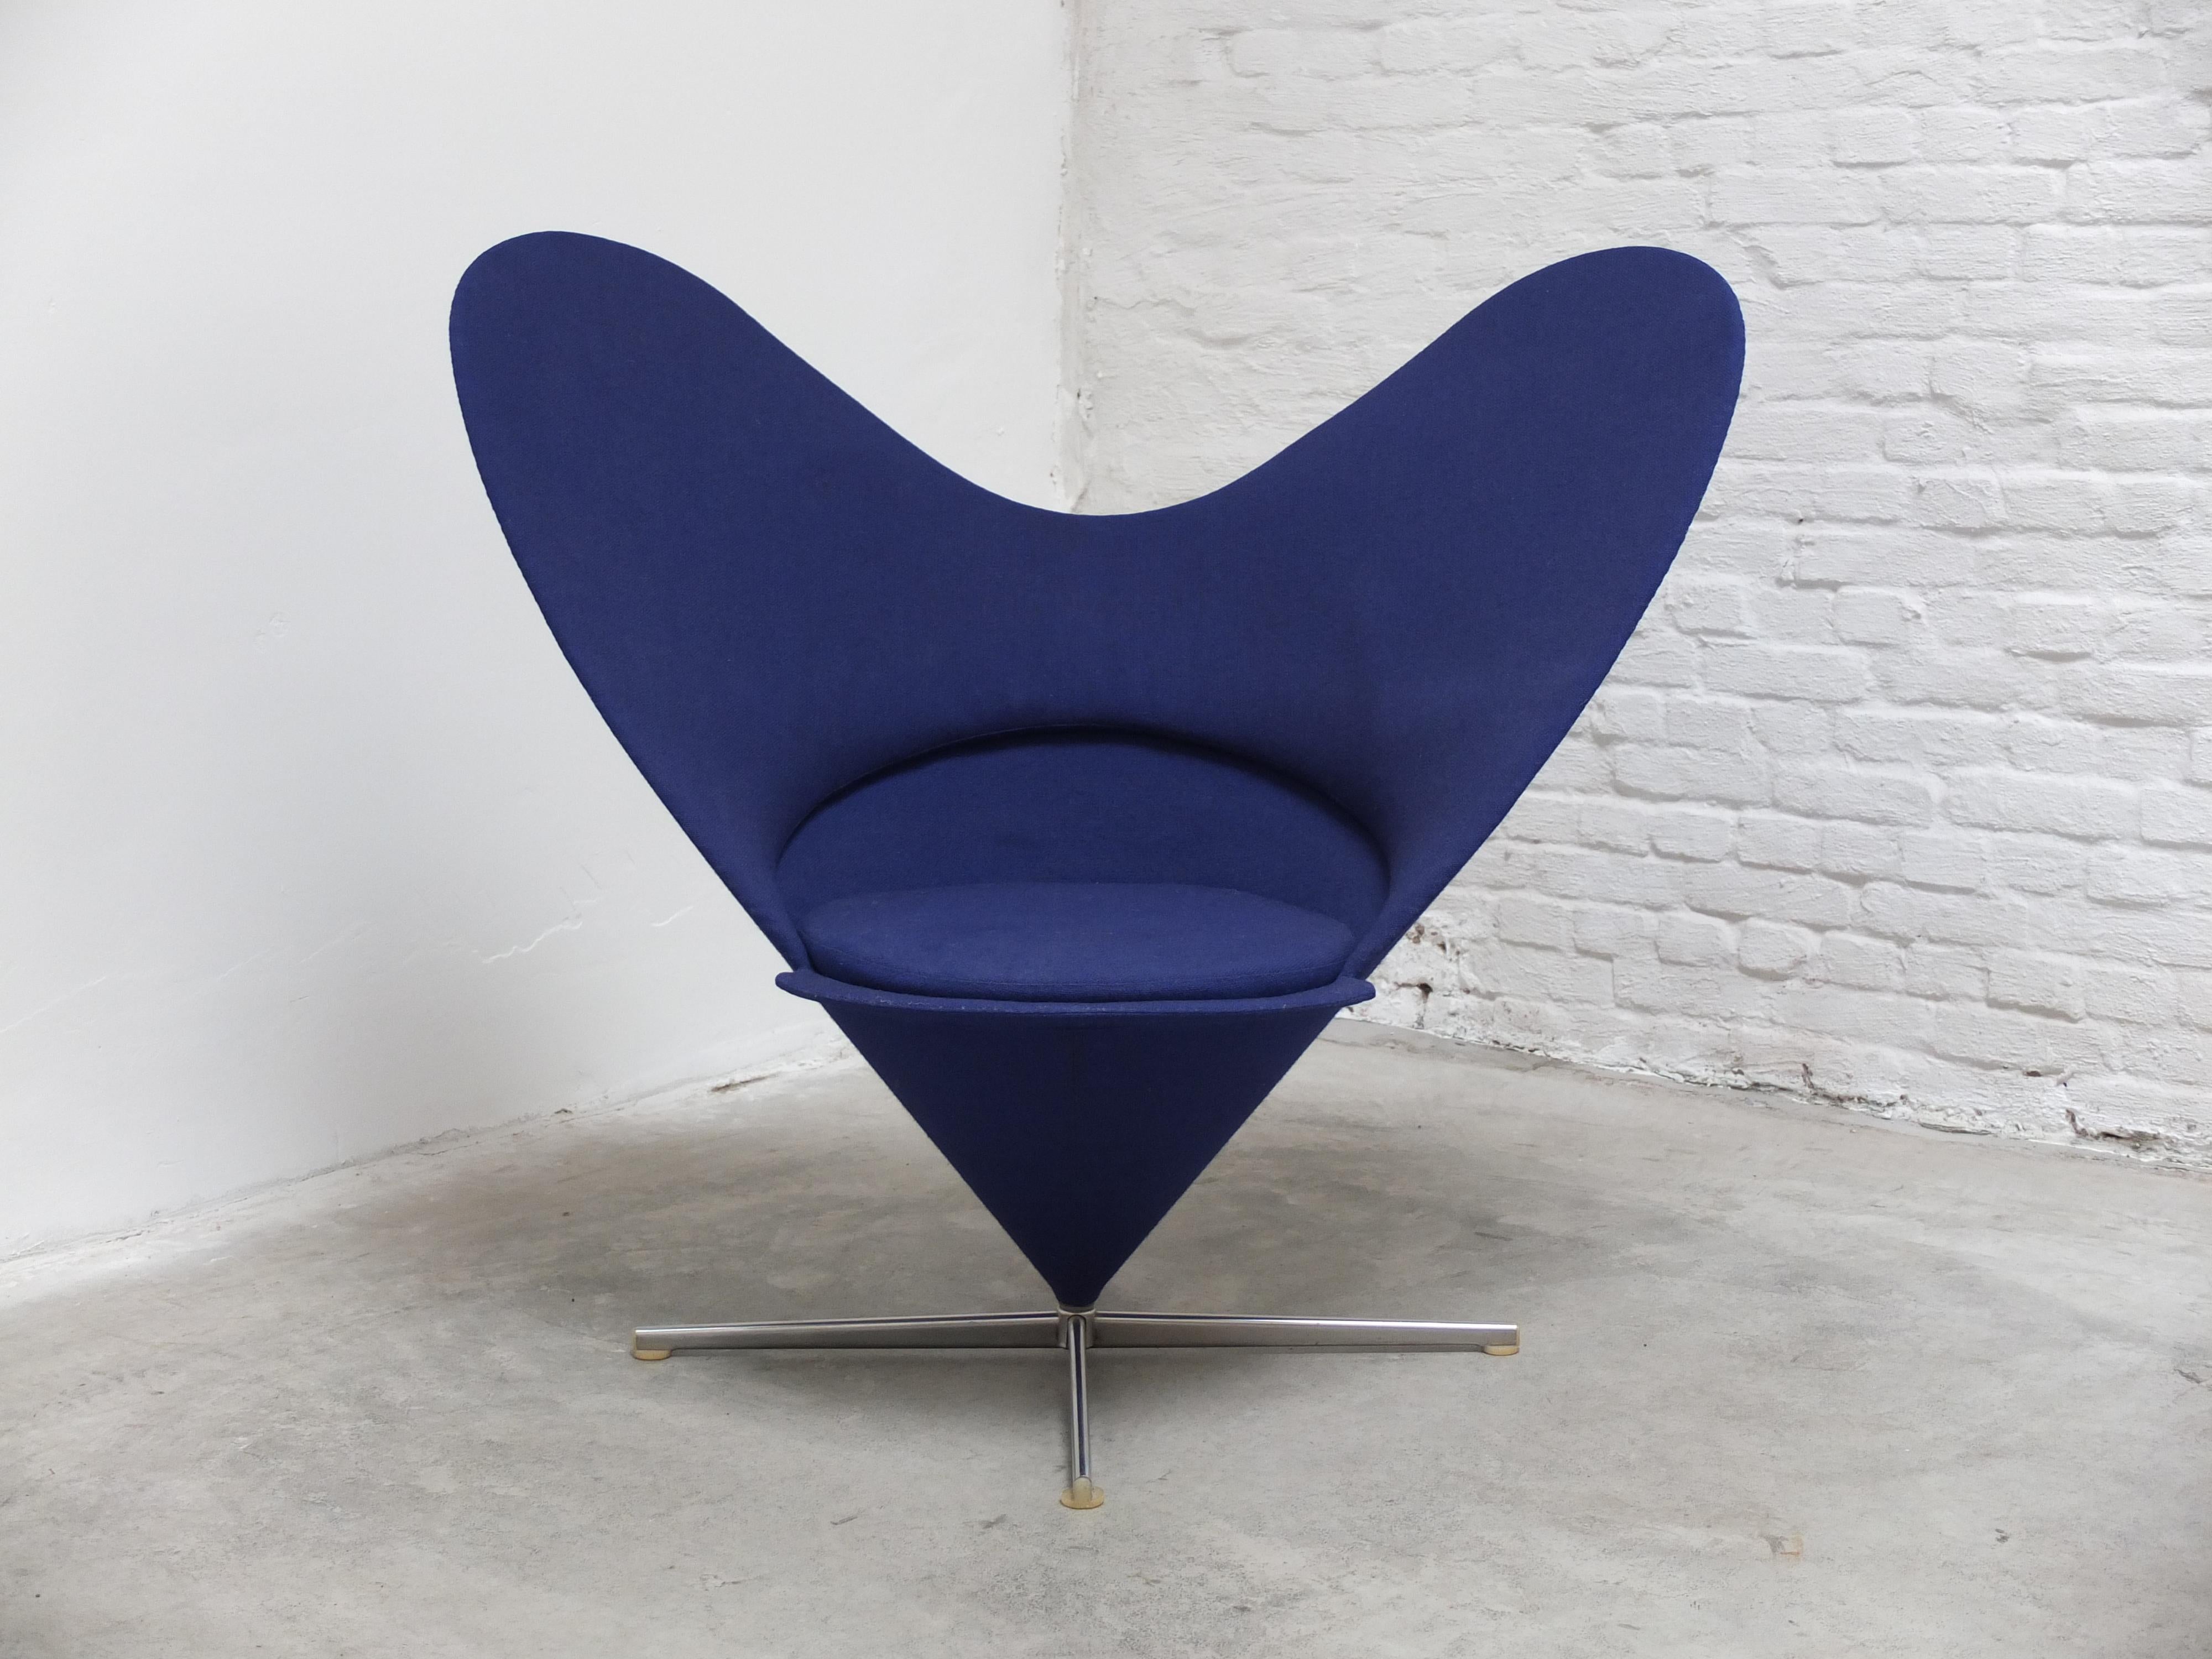 Iconic ‘Heart Cone’ chair designed by Verner Panton in 1958. This is an original early example produced by Plus Linje in Denmark during the 1950s-60s. This means the foam inside is not what it used to be but apart from that this sculptural artwork